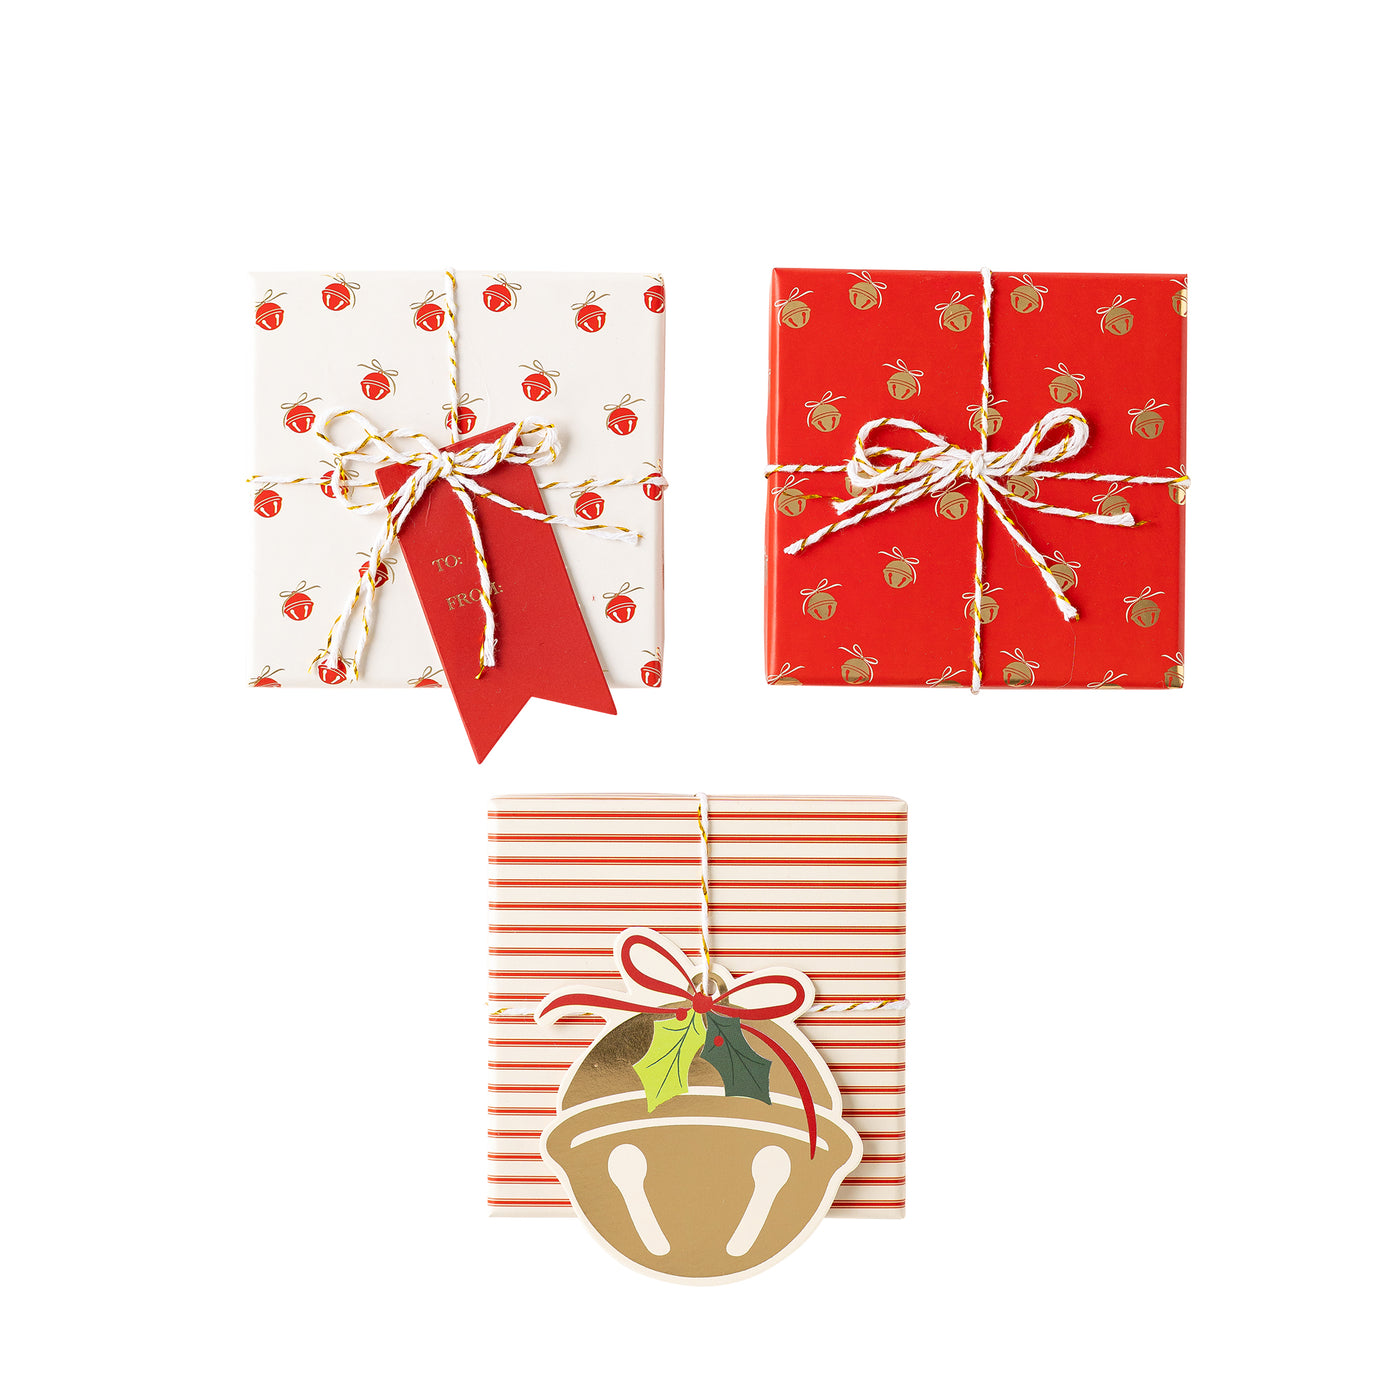 PLGC72 - Bells Gift Card Boxes